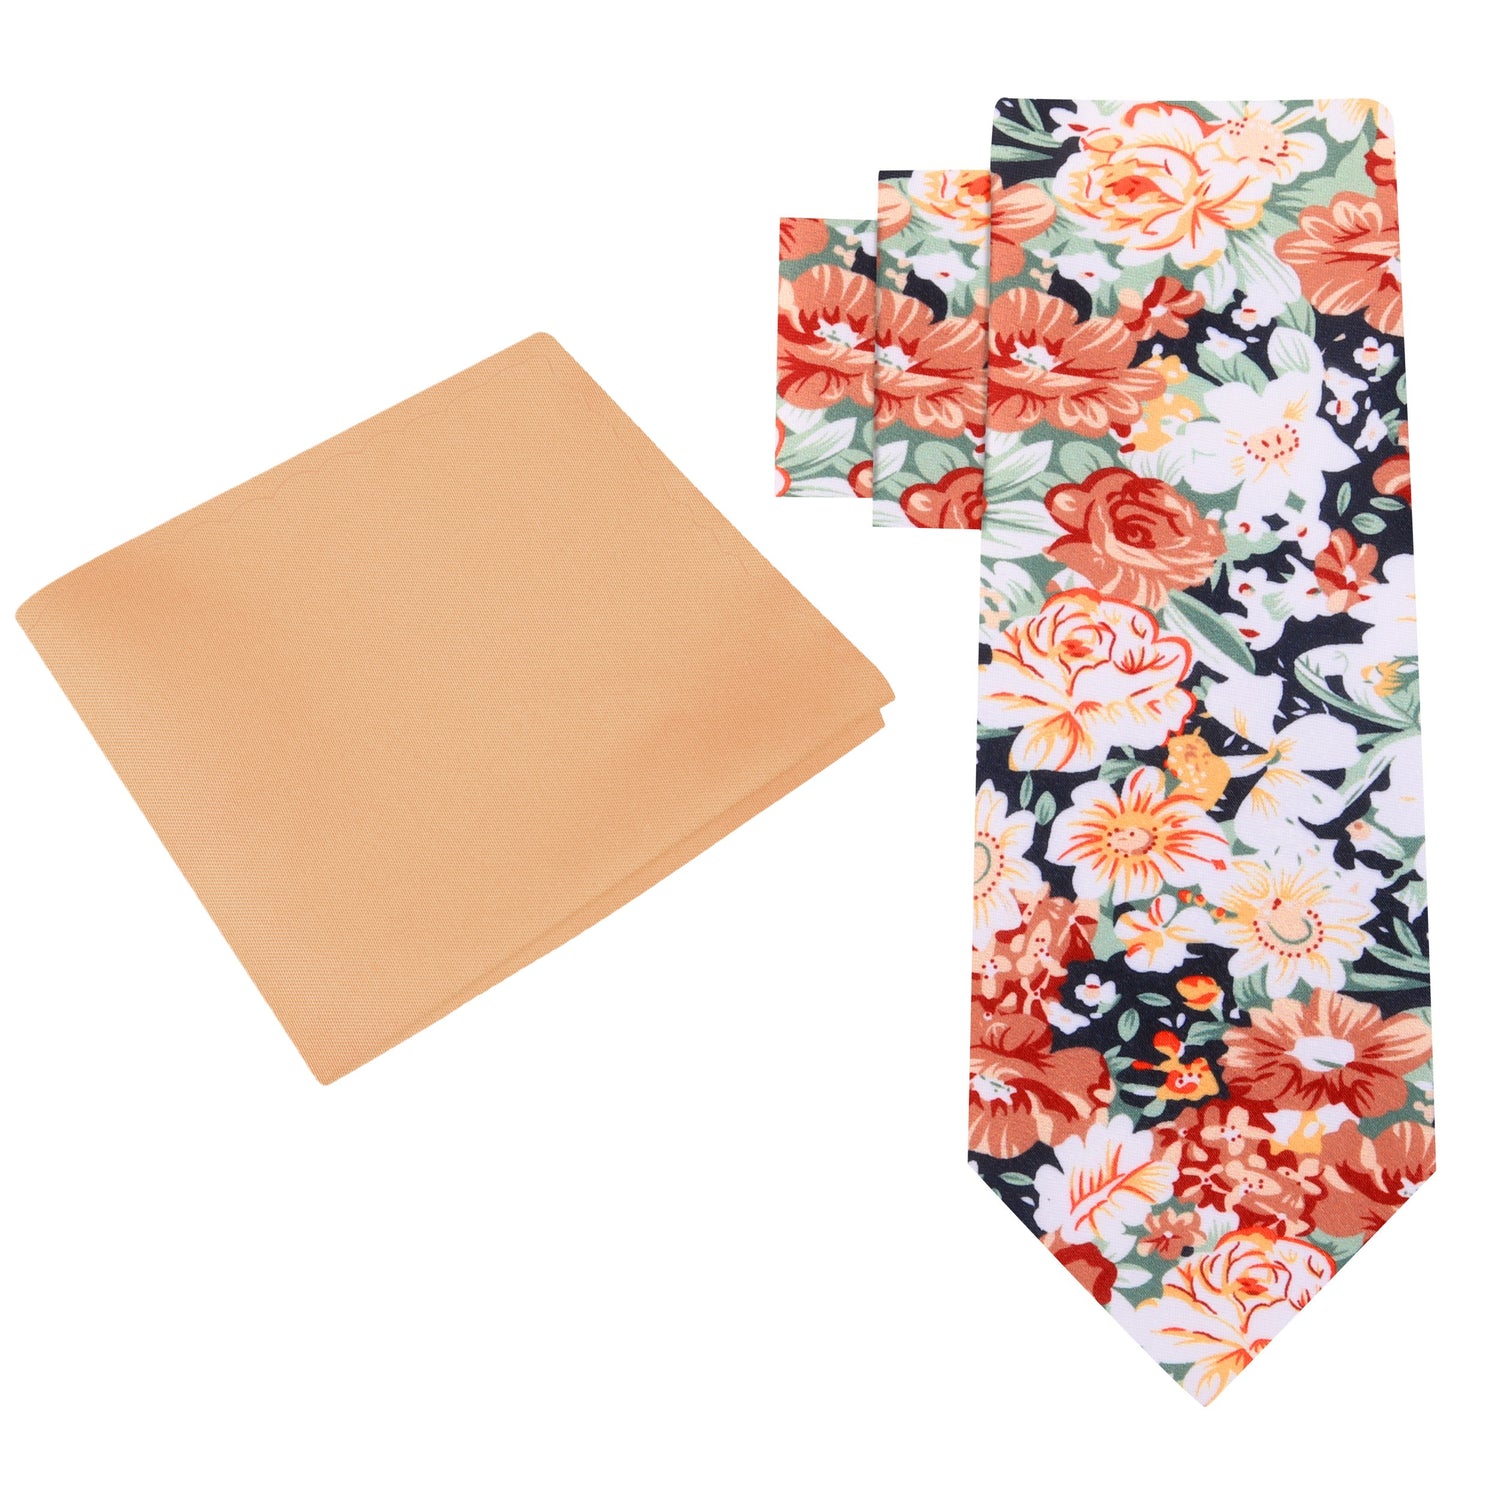 Alt View: Brown, Orange, White, Green Sketched Flowers Tie and Light Orange Square